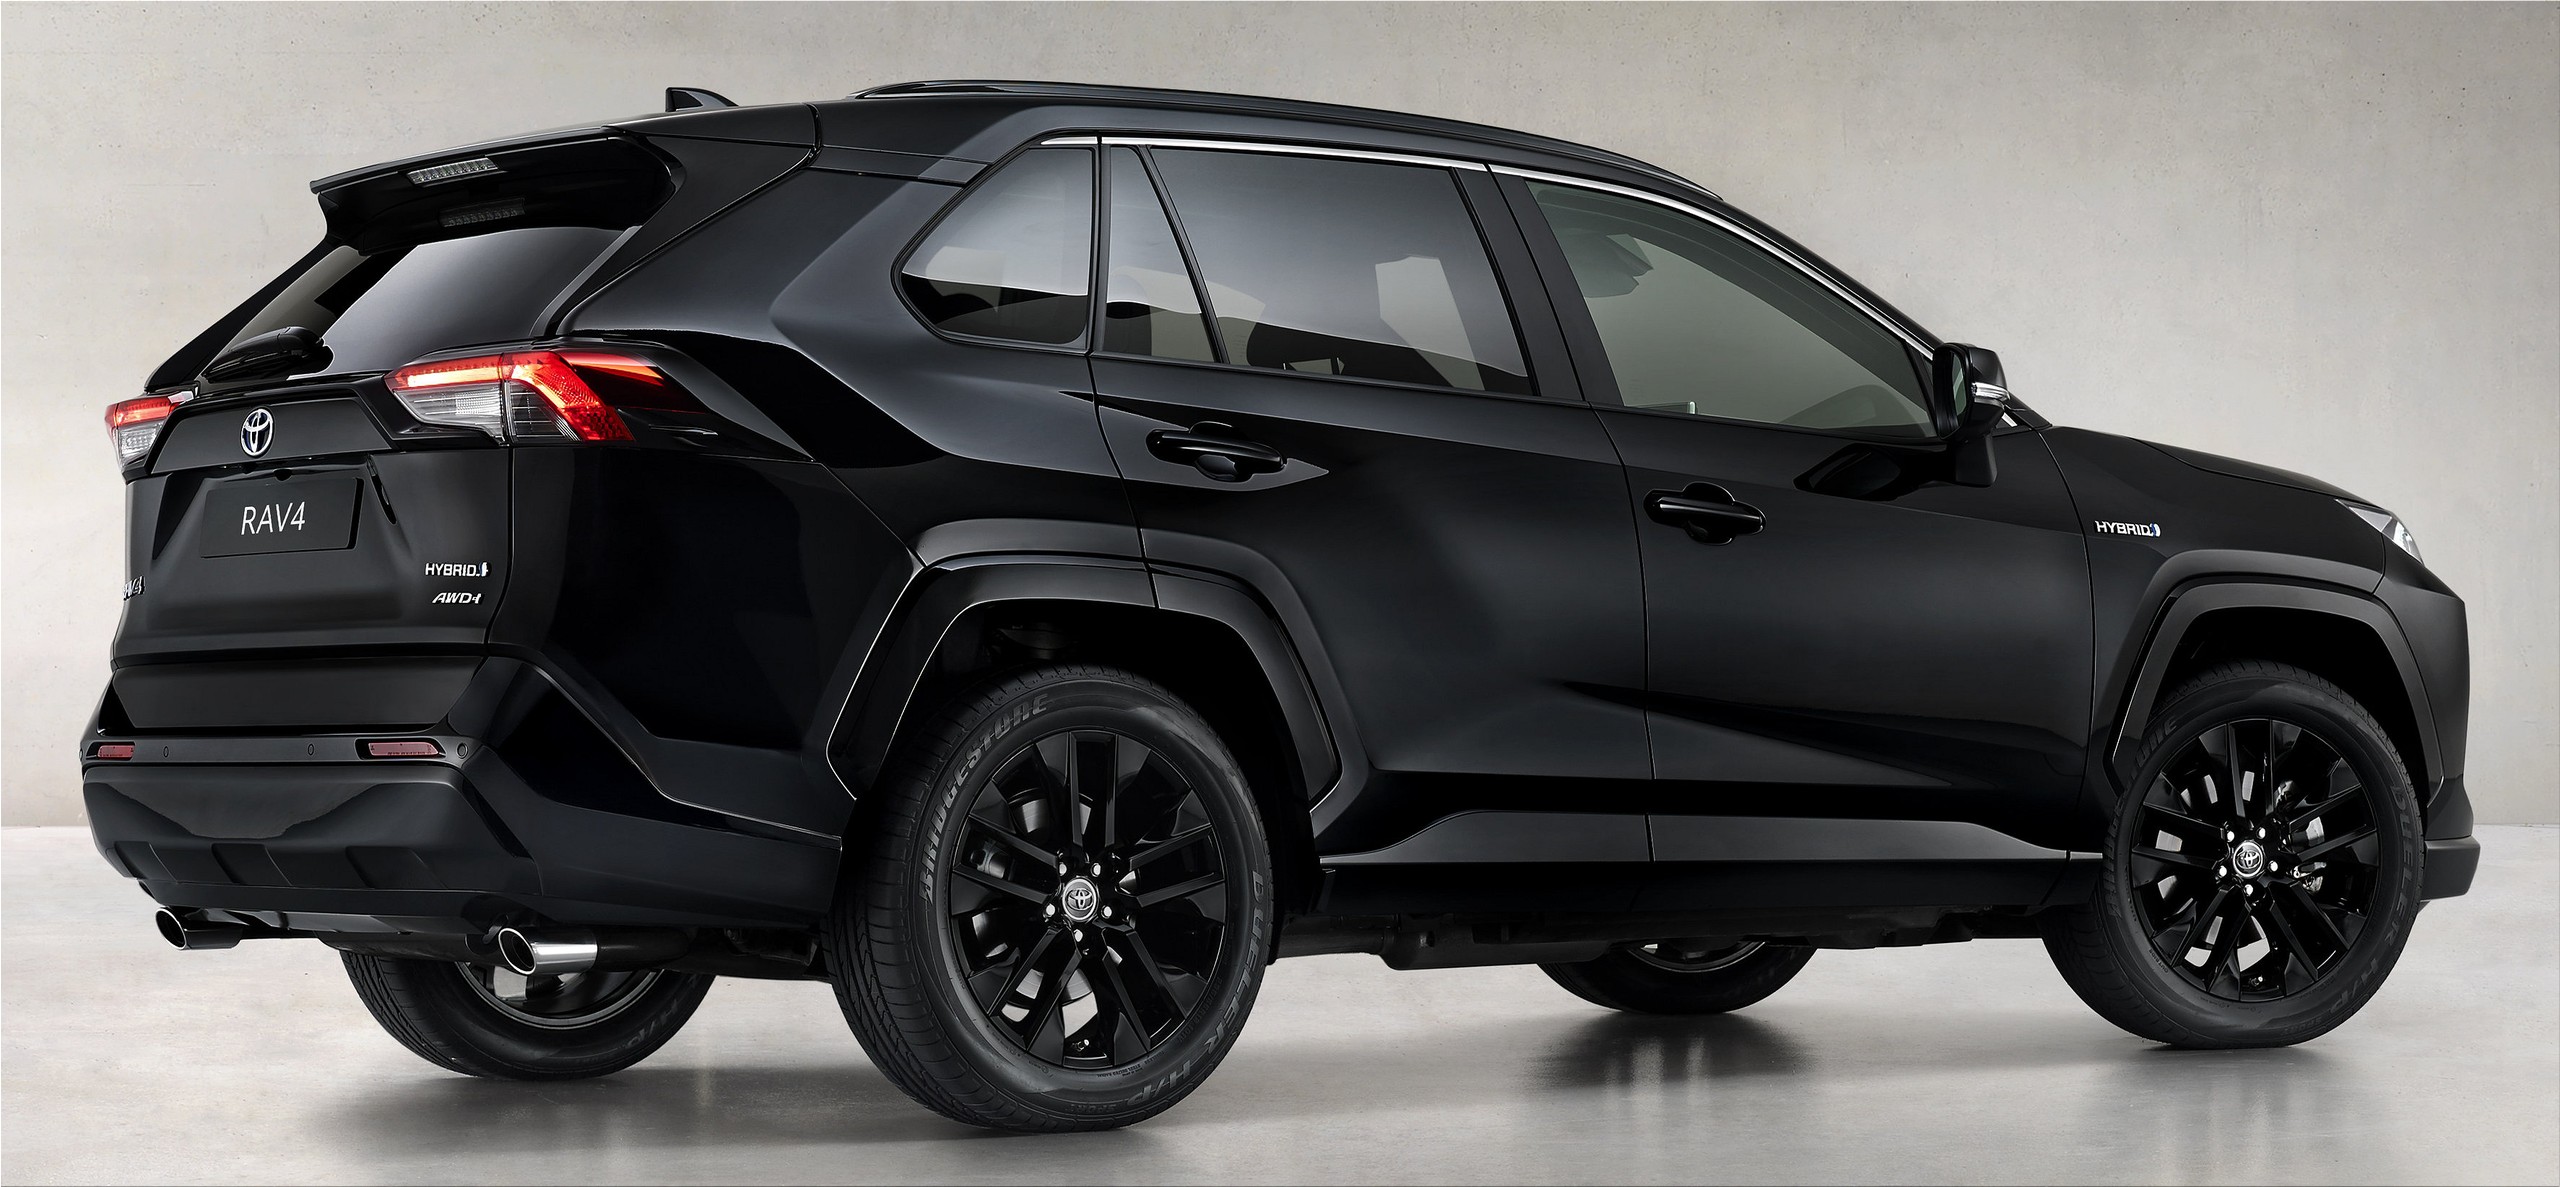 Toyota Rav4 New Model Images And Photos Finder